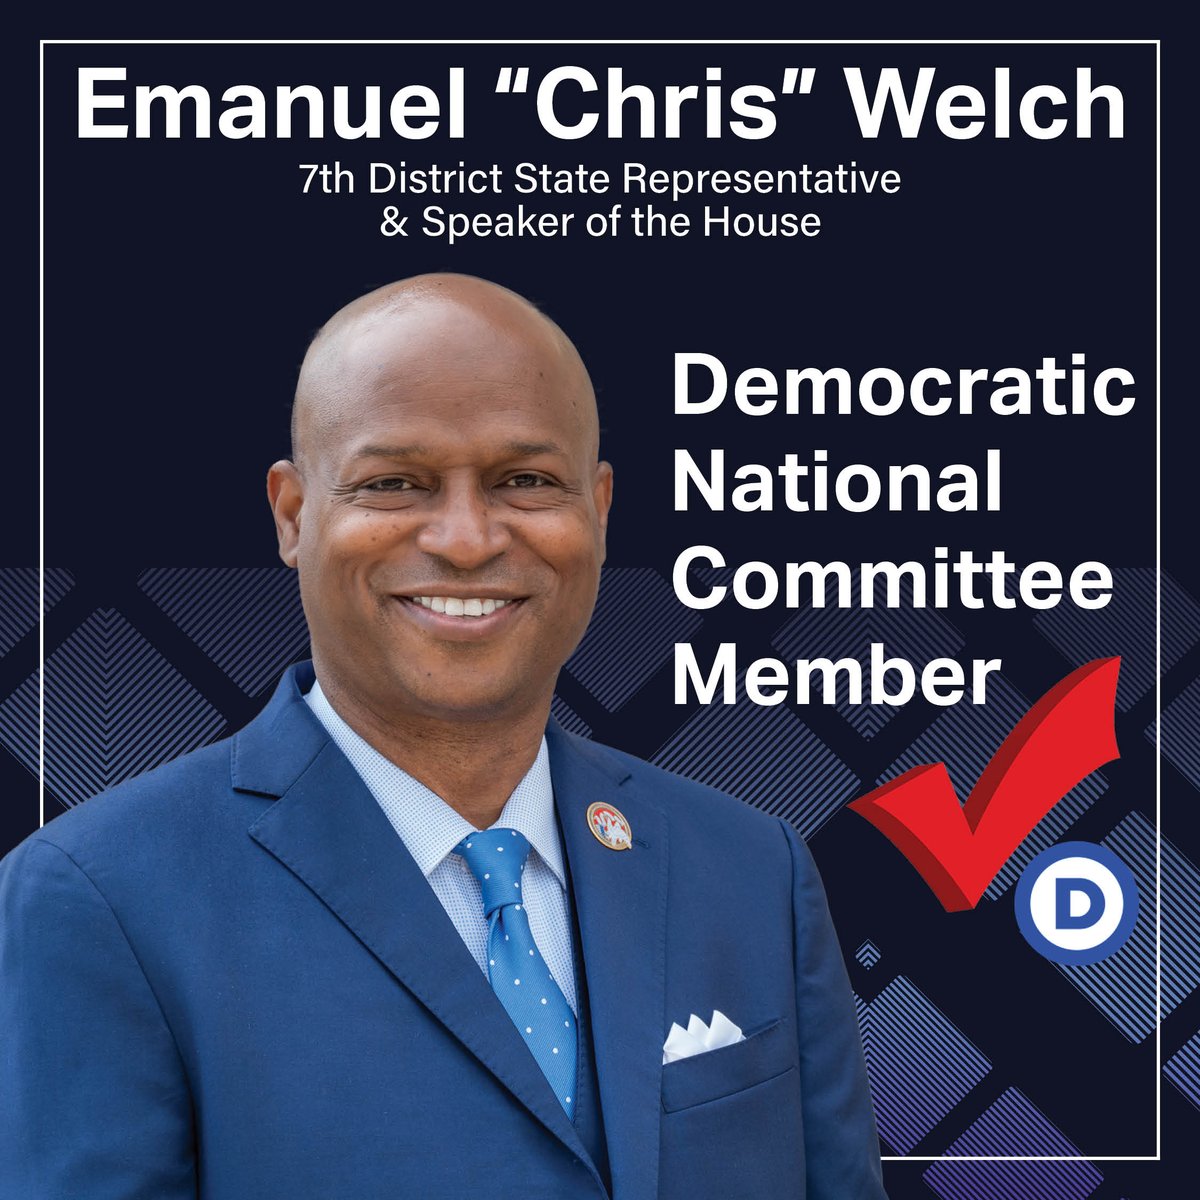 Last night, @illinoisdems elected me to serve as one of seven 'base' members on the Democratic National Committee. I am incredibly honored to serve our state alongside some of Illinois' top political leaders. @TheDemocrats #DNC